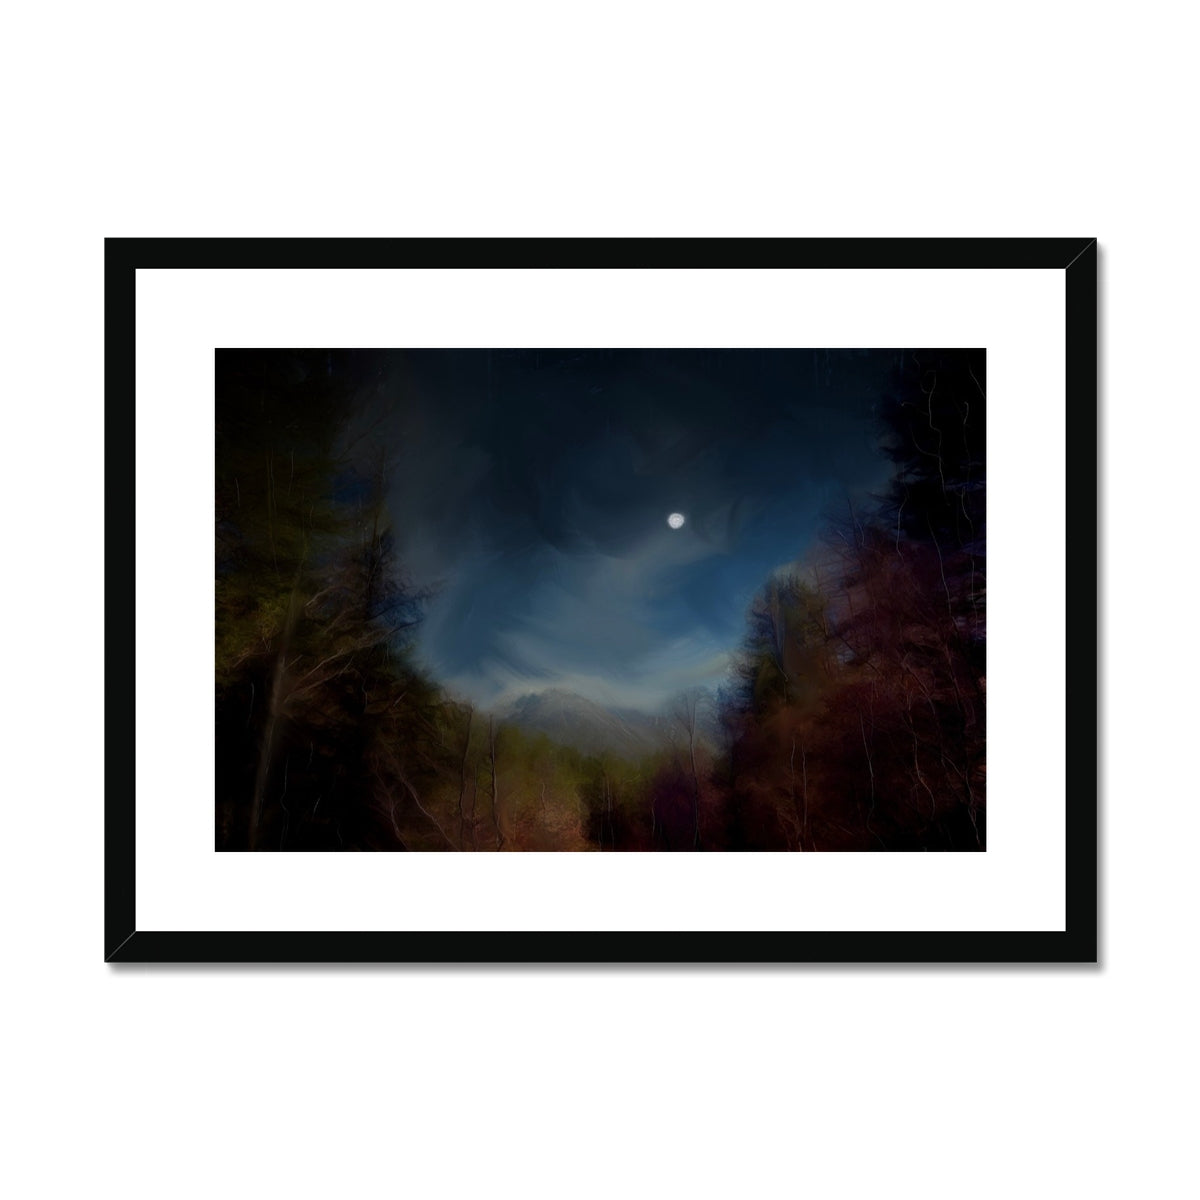 Glencoe Lochan Moonlight Painting | Framed & Mounted Prints From Scotland-Framed & Mounted Prints-Scottish Lochs & Mountains Art Gallery-A2 Landscape-Black Frame-Paintings, Prints, Homeware, Art Gifts From Scotland By Scottish Artist Kevin Hunter